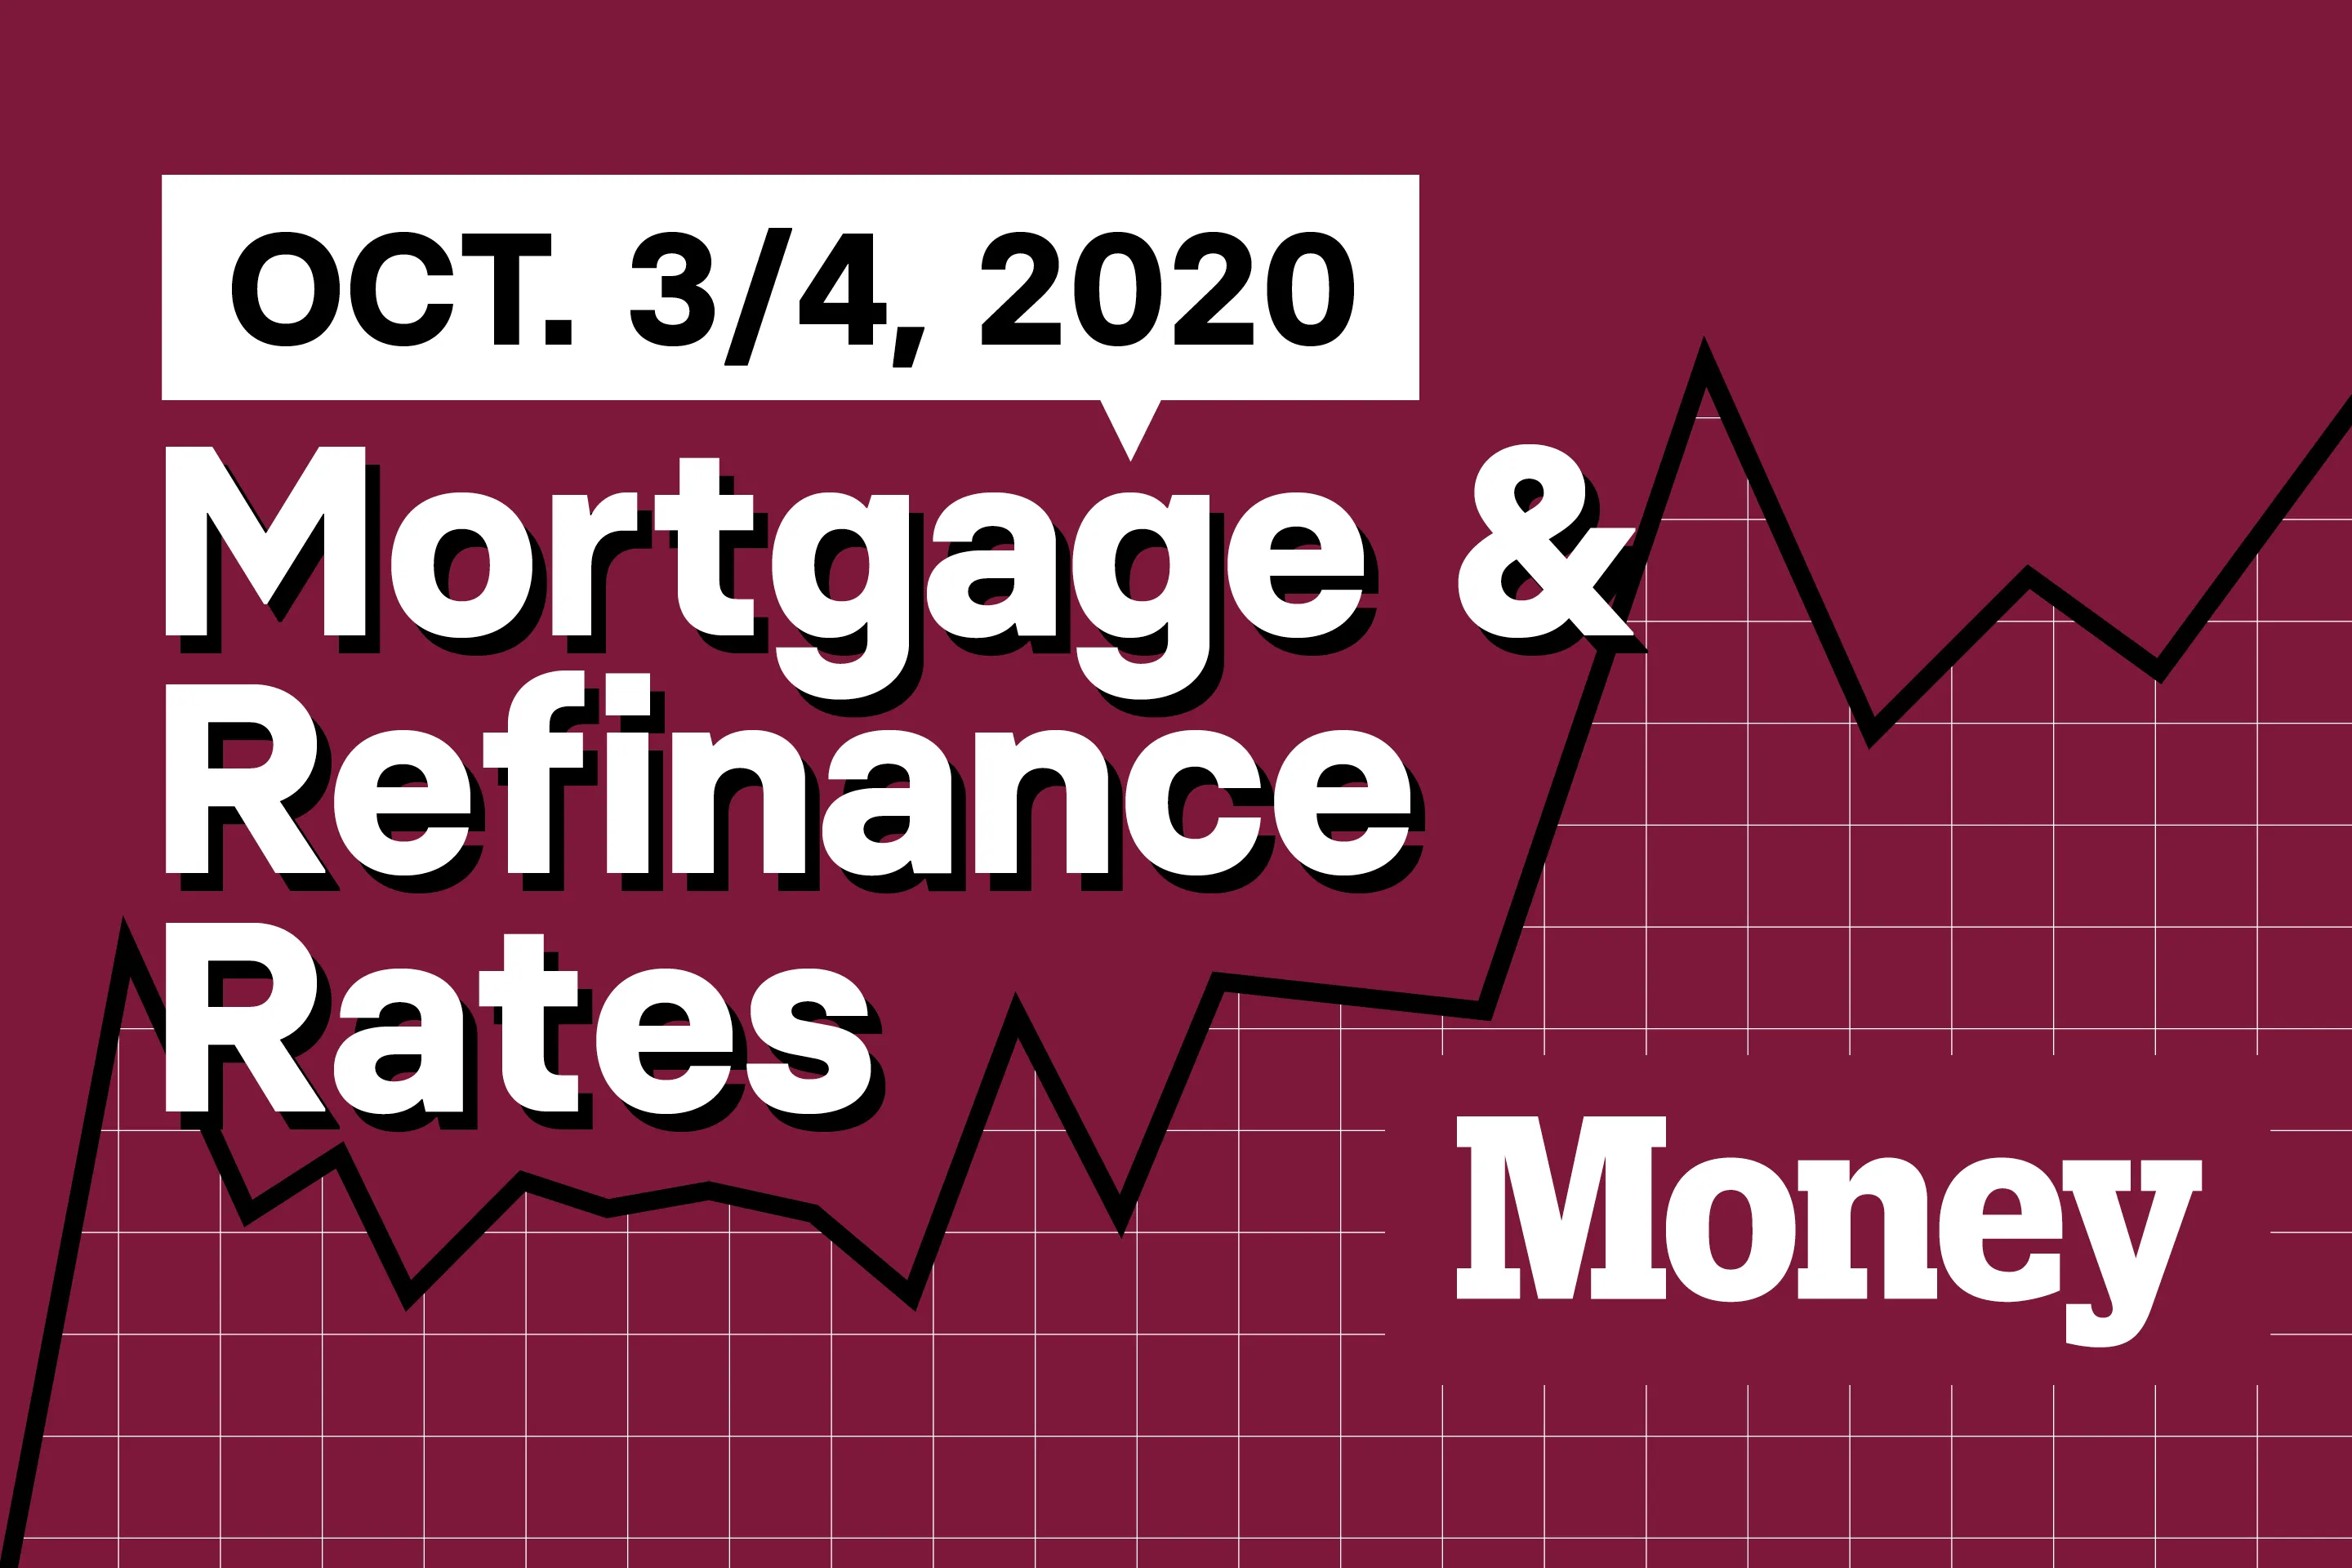 Today's Mortgage and Refinance Rates for October 3rd and 4th